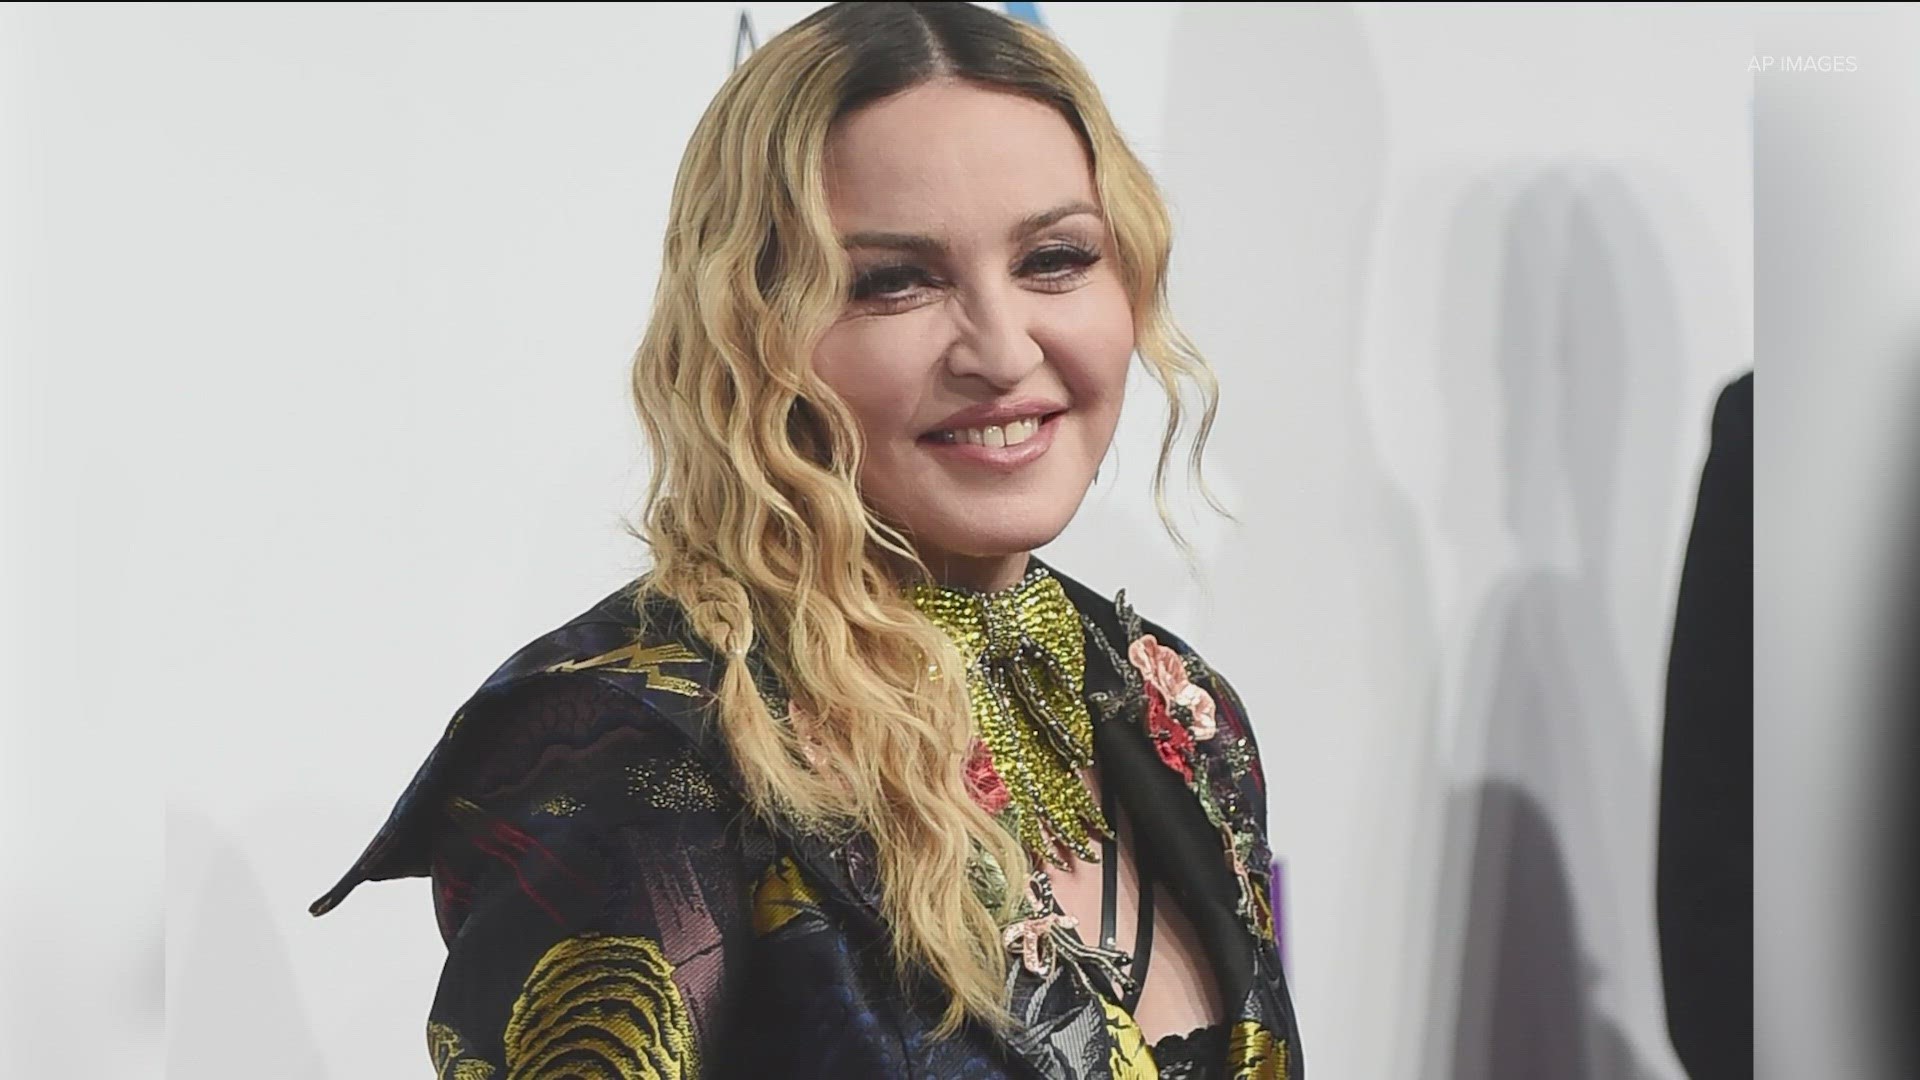 If you bought tickets to see Madonna at the Moody Center in September, you will have to wait a little longer to see the pop star.